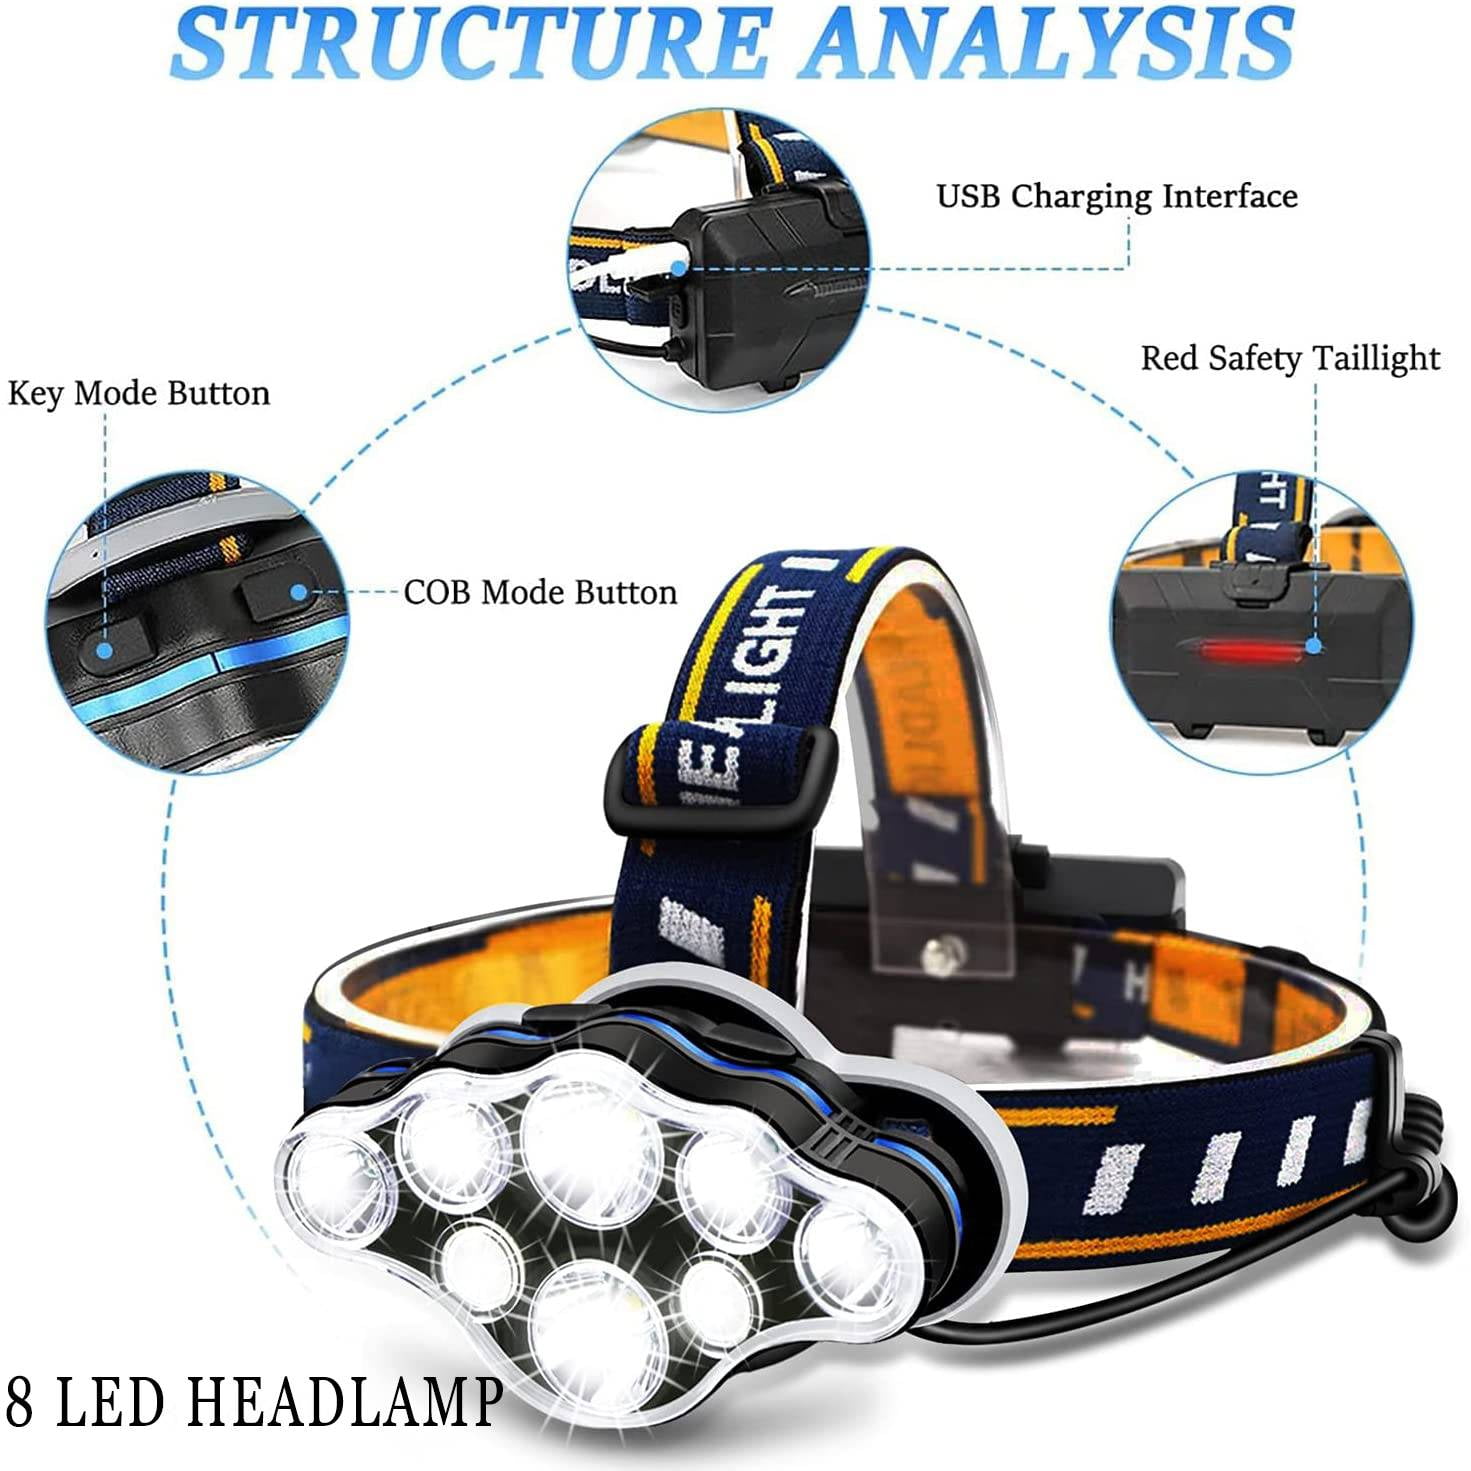 USB Rechargeable Headlamp Flashlight 180 Lumen up to 40 Hours of Constant Light for sale online 